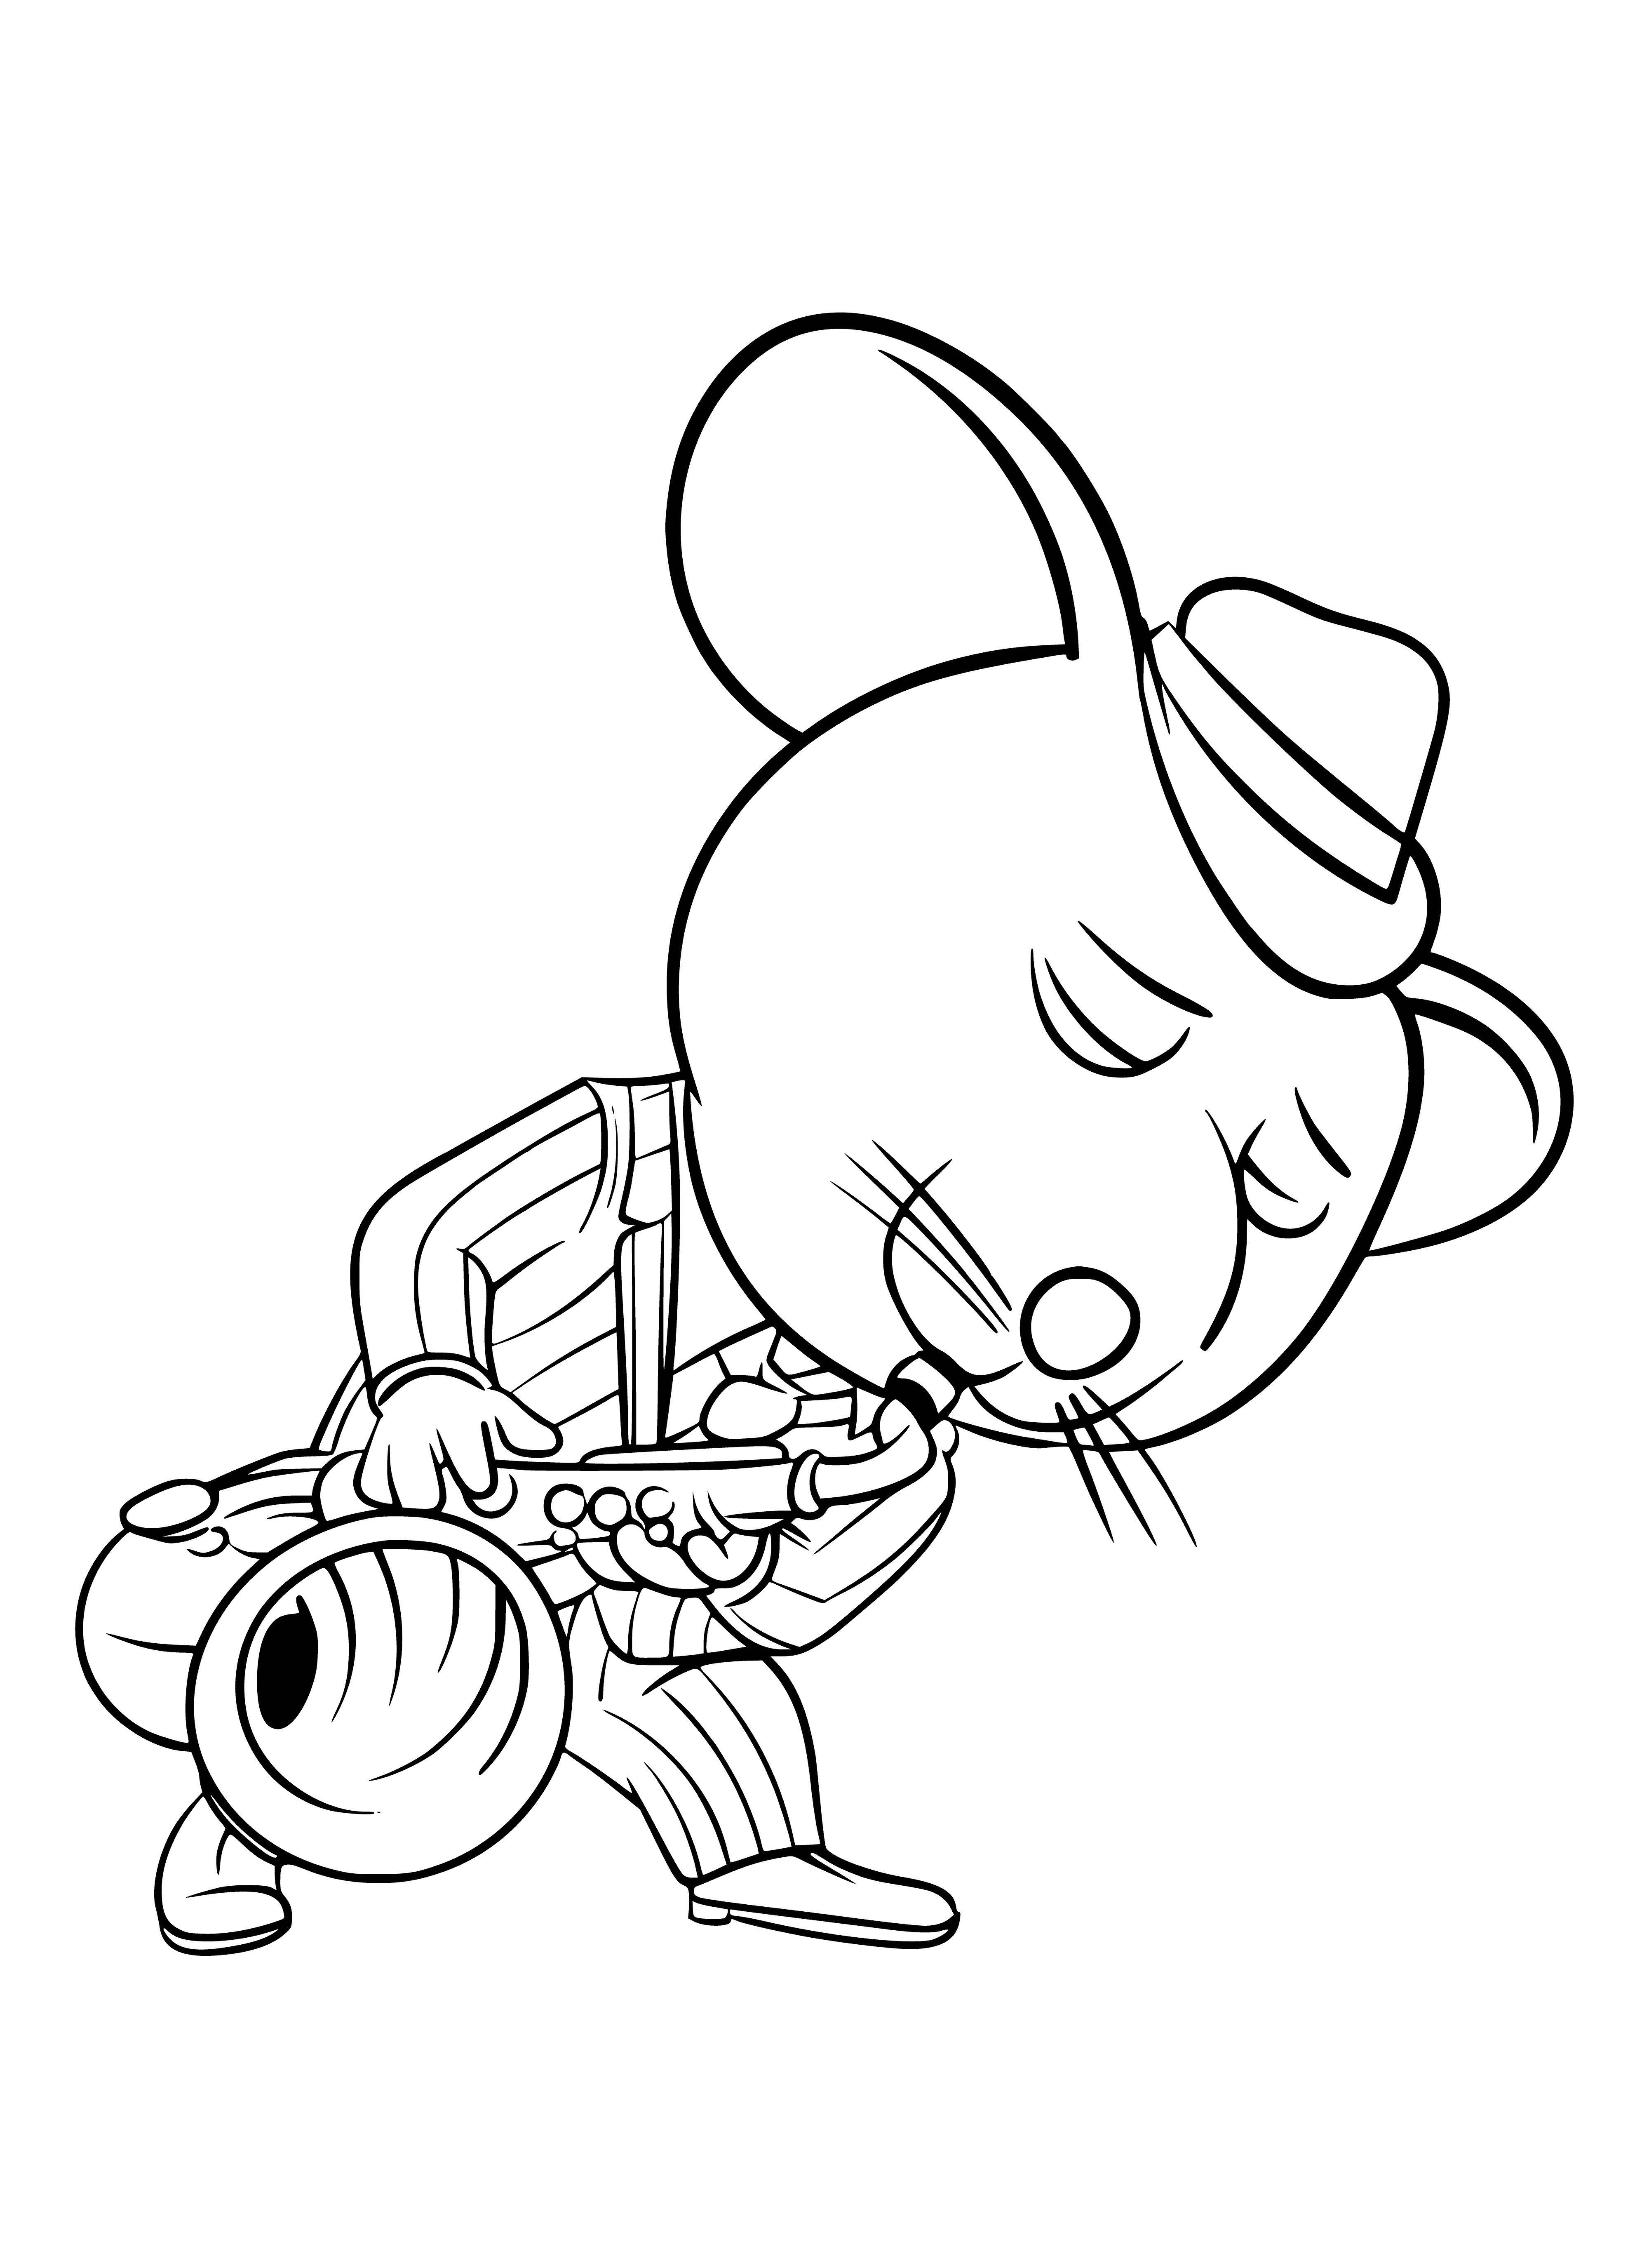 coloring page: Mouse in blue wearing top hat & suspenders on green stool with yellow feet, singing into mike on stand.